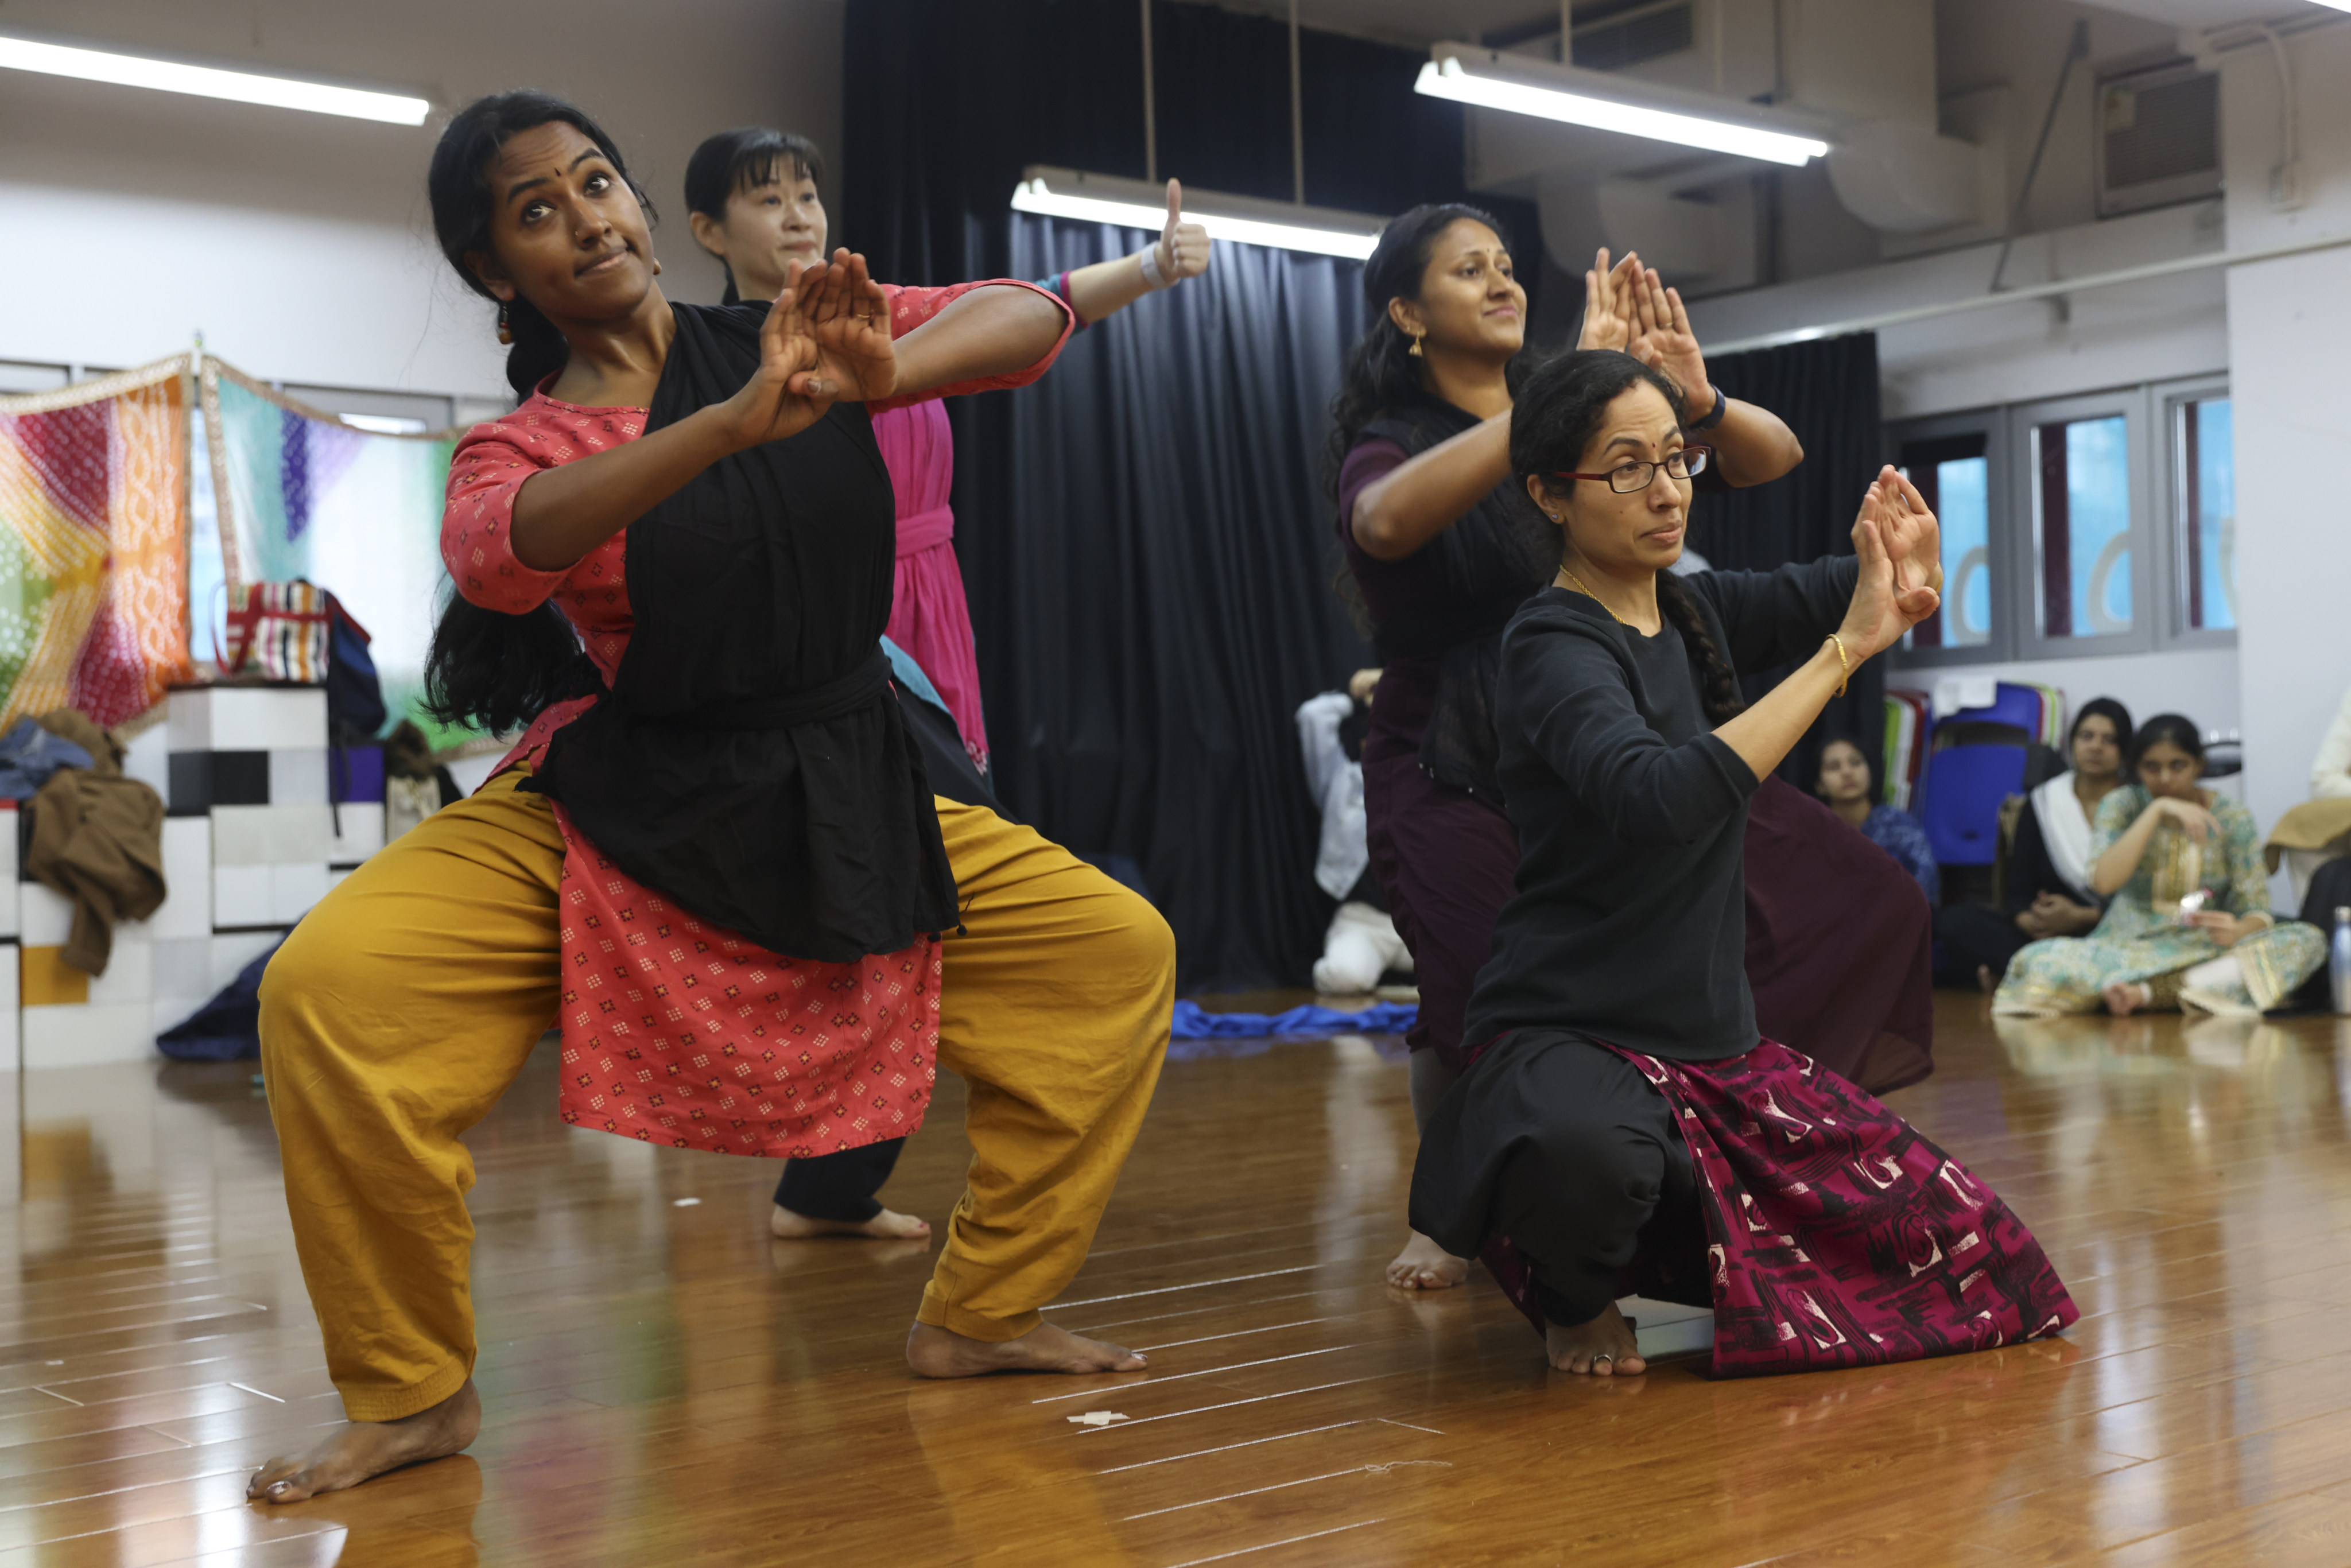 Dancers rehearse for “Krishnarpanam”, a fusion of dance and storytelling that showcases India’s many traditional dance styles, at Beyond Bollywood’s studio in Tai Po, Hong Kong. Photo: Yik Yeung-man